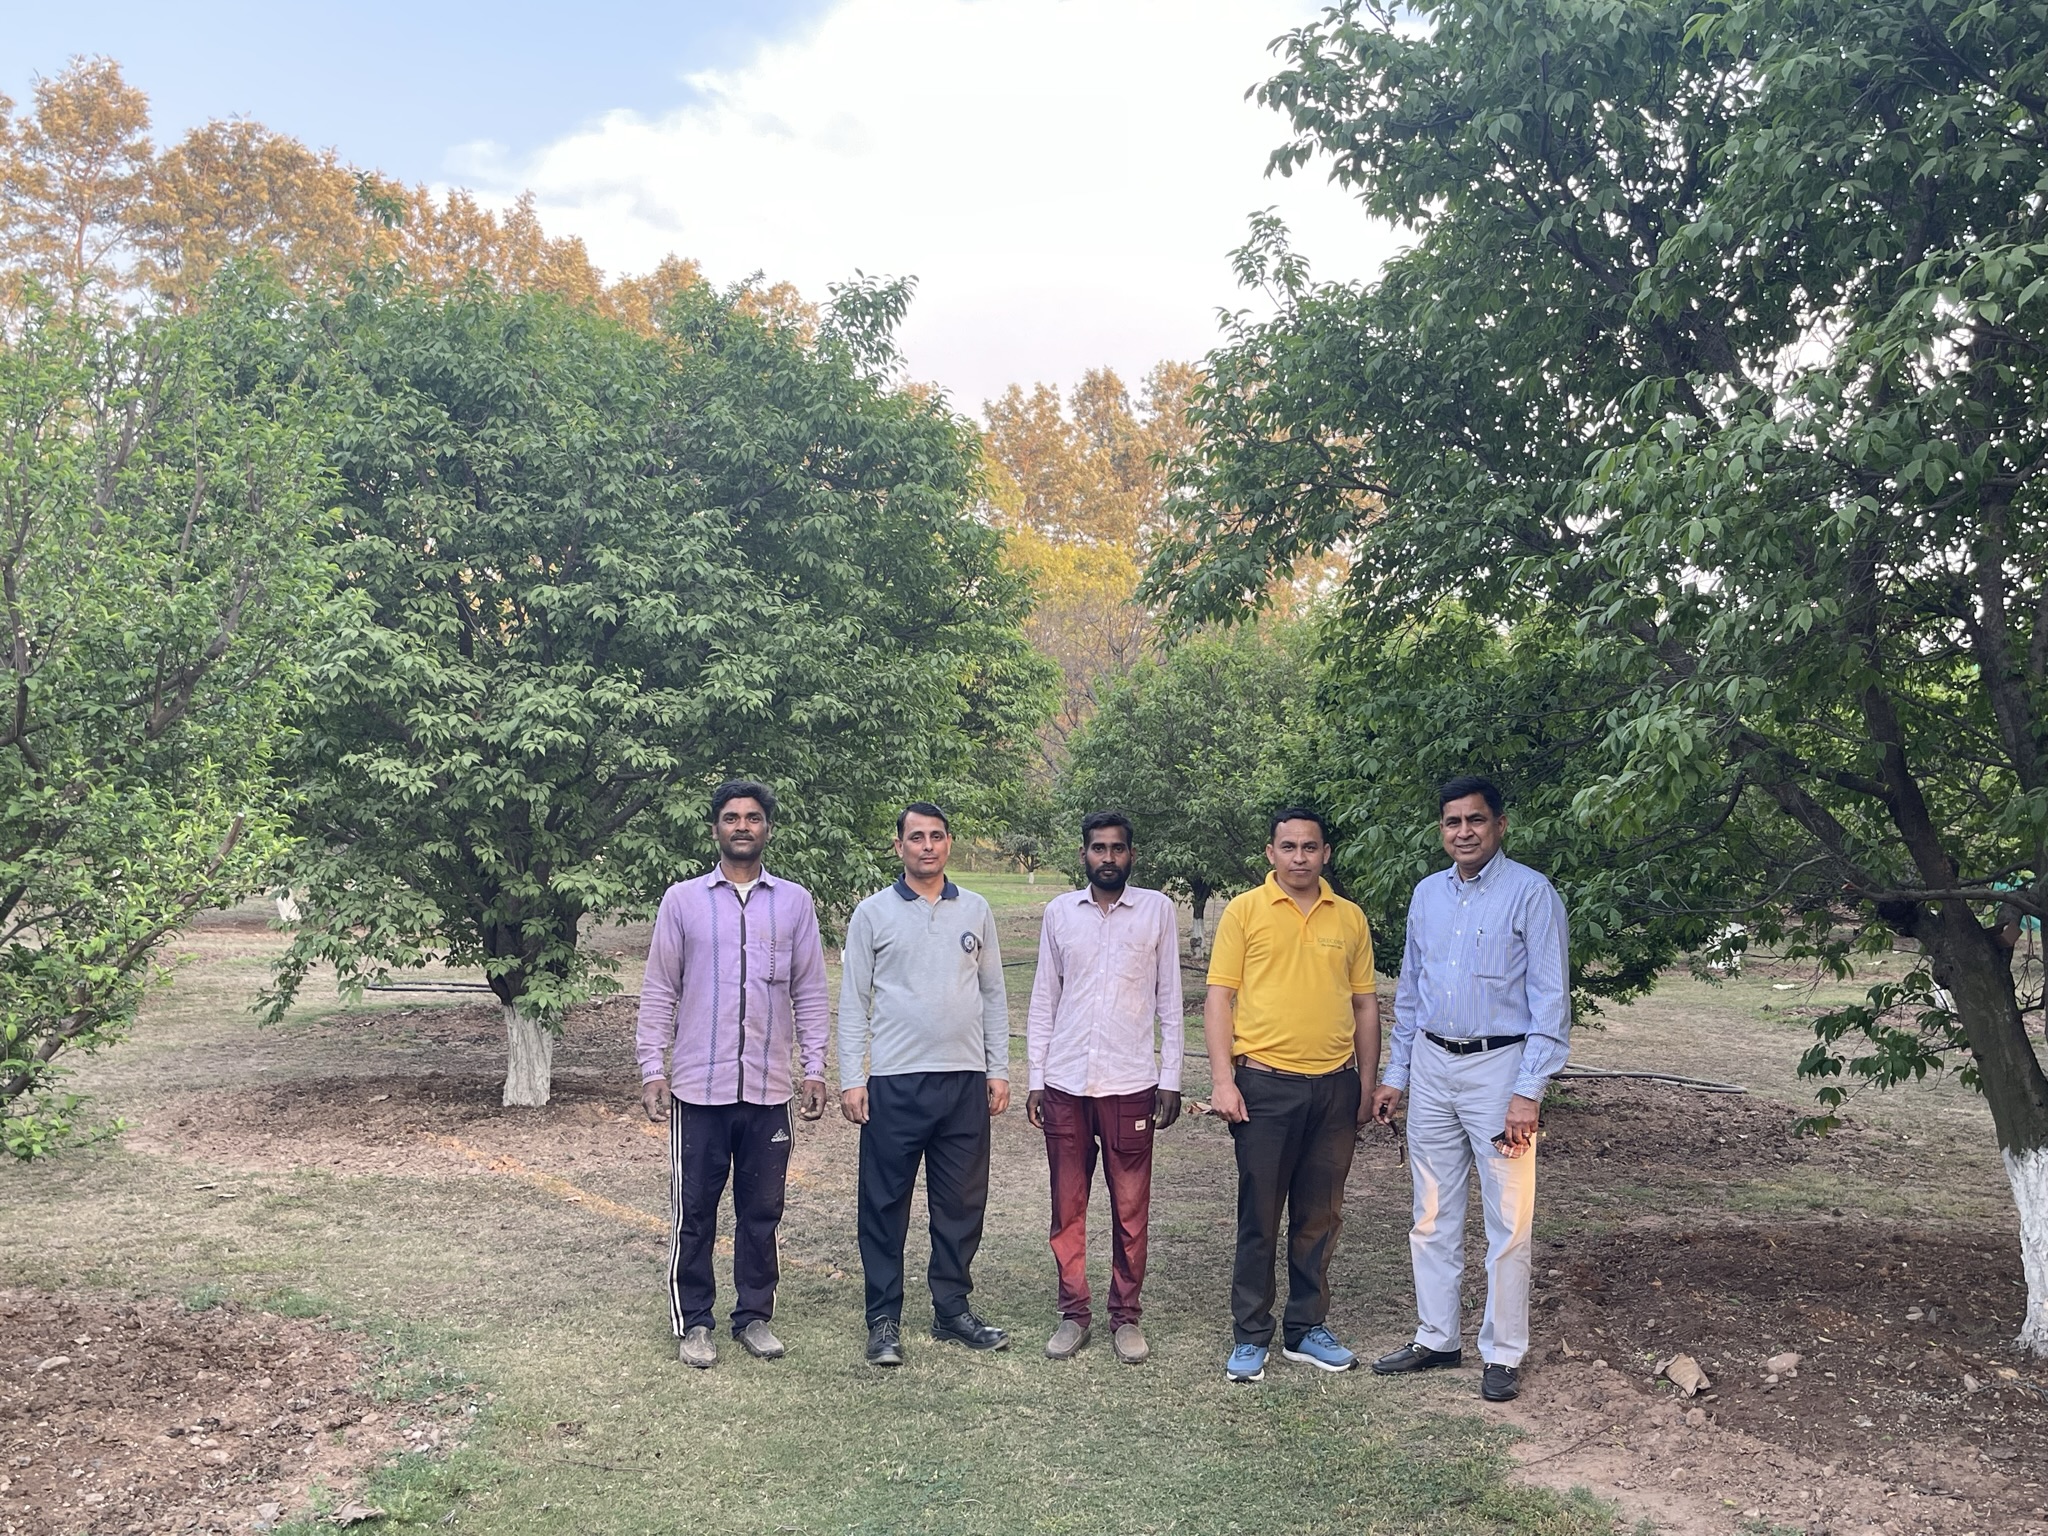 Cepham works closely with local communities and farmers in Himachal Pradesh to ensure responsible and sustainable harvesting of prune twigs for Prosprune. On far right, owner and chief farming officer, Pawan Goel stands with his farming team at Experimental Organic Farm who care for the Prunus domestica trees.